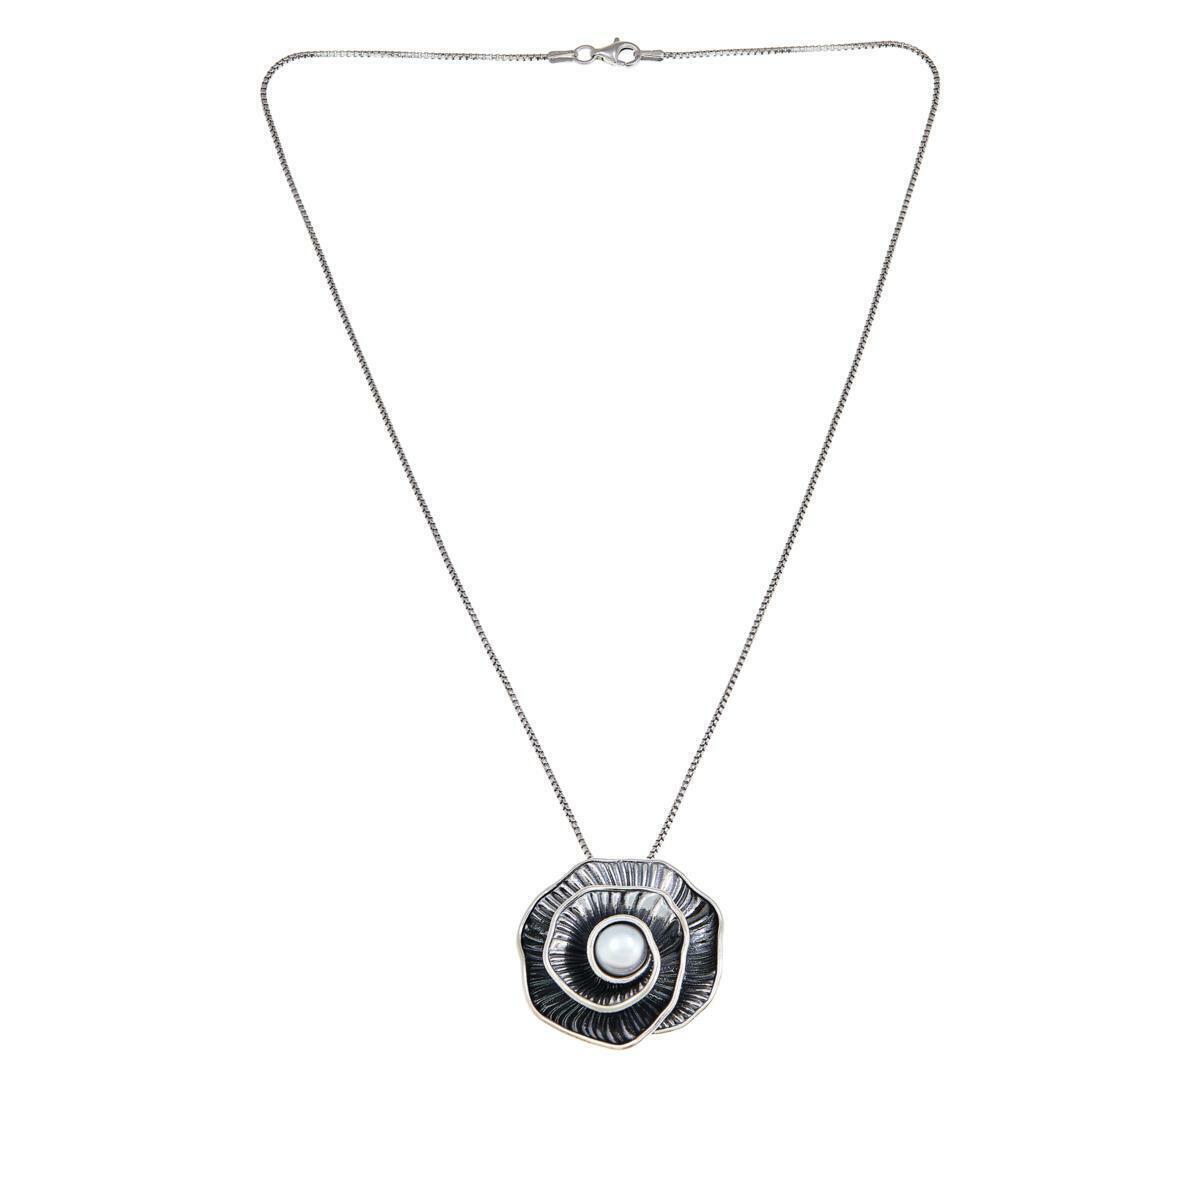 LiPaz Sterling Silver Cultured Pearl Spiral Flower Pendant 18" Necklace